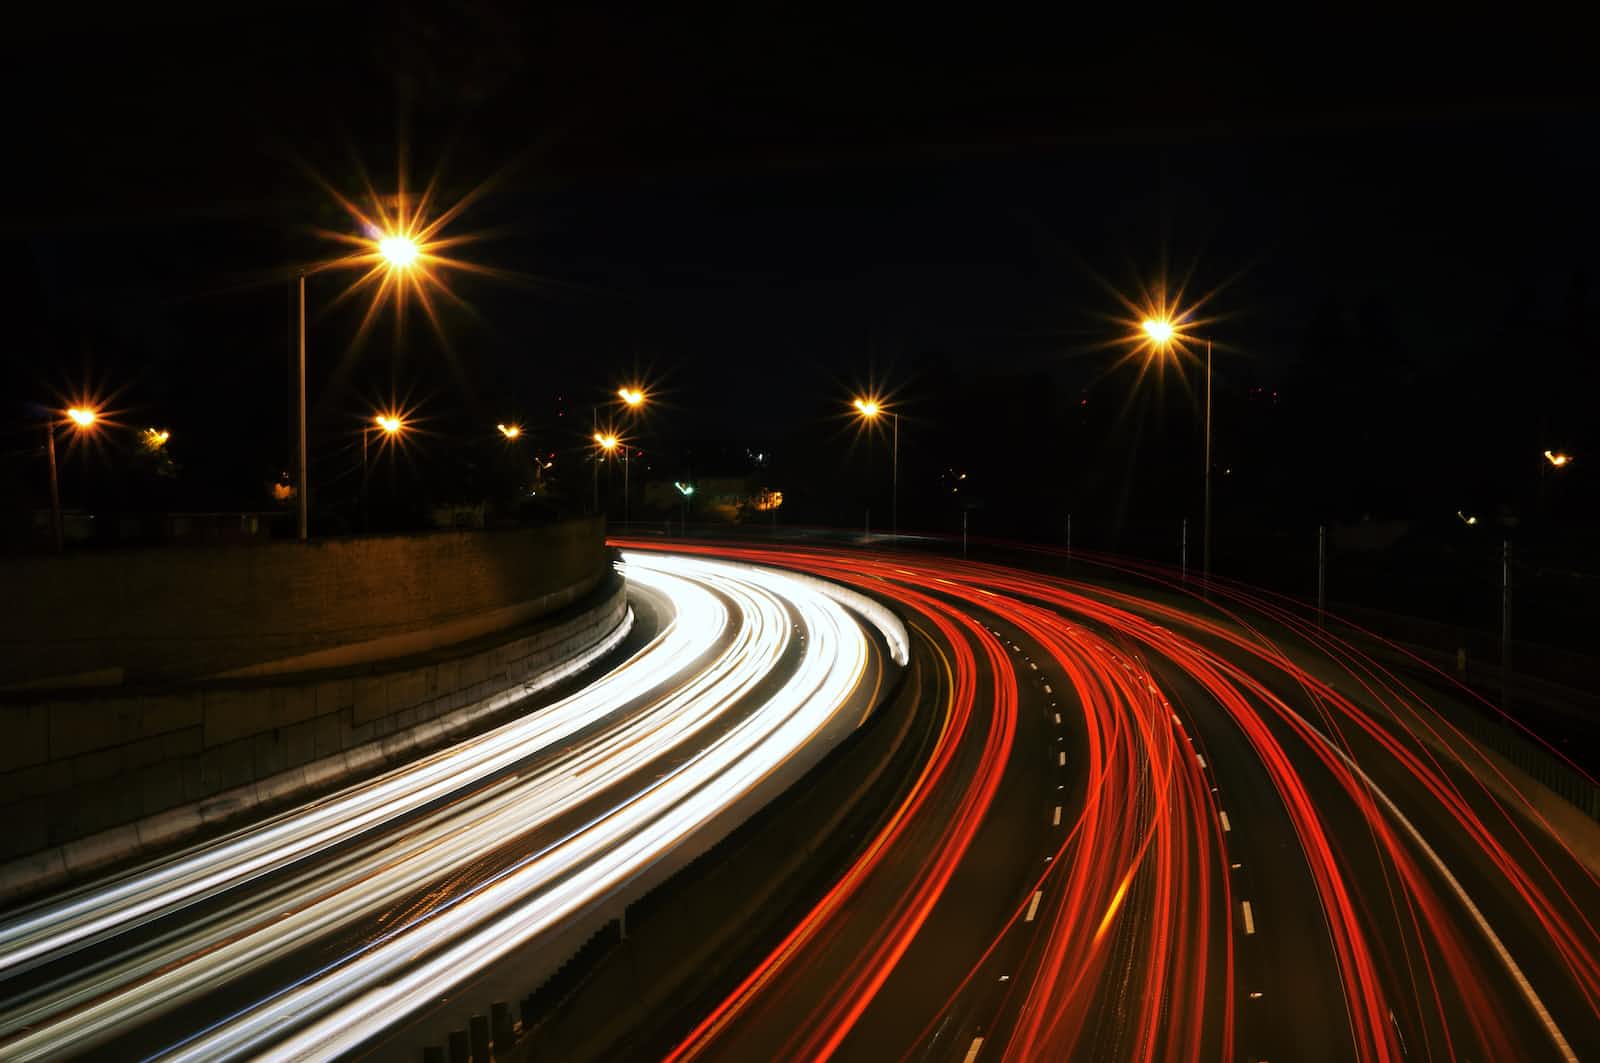 A timelapse photo of a highway showing speeding vehicles